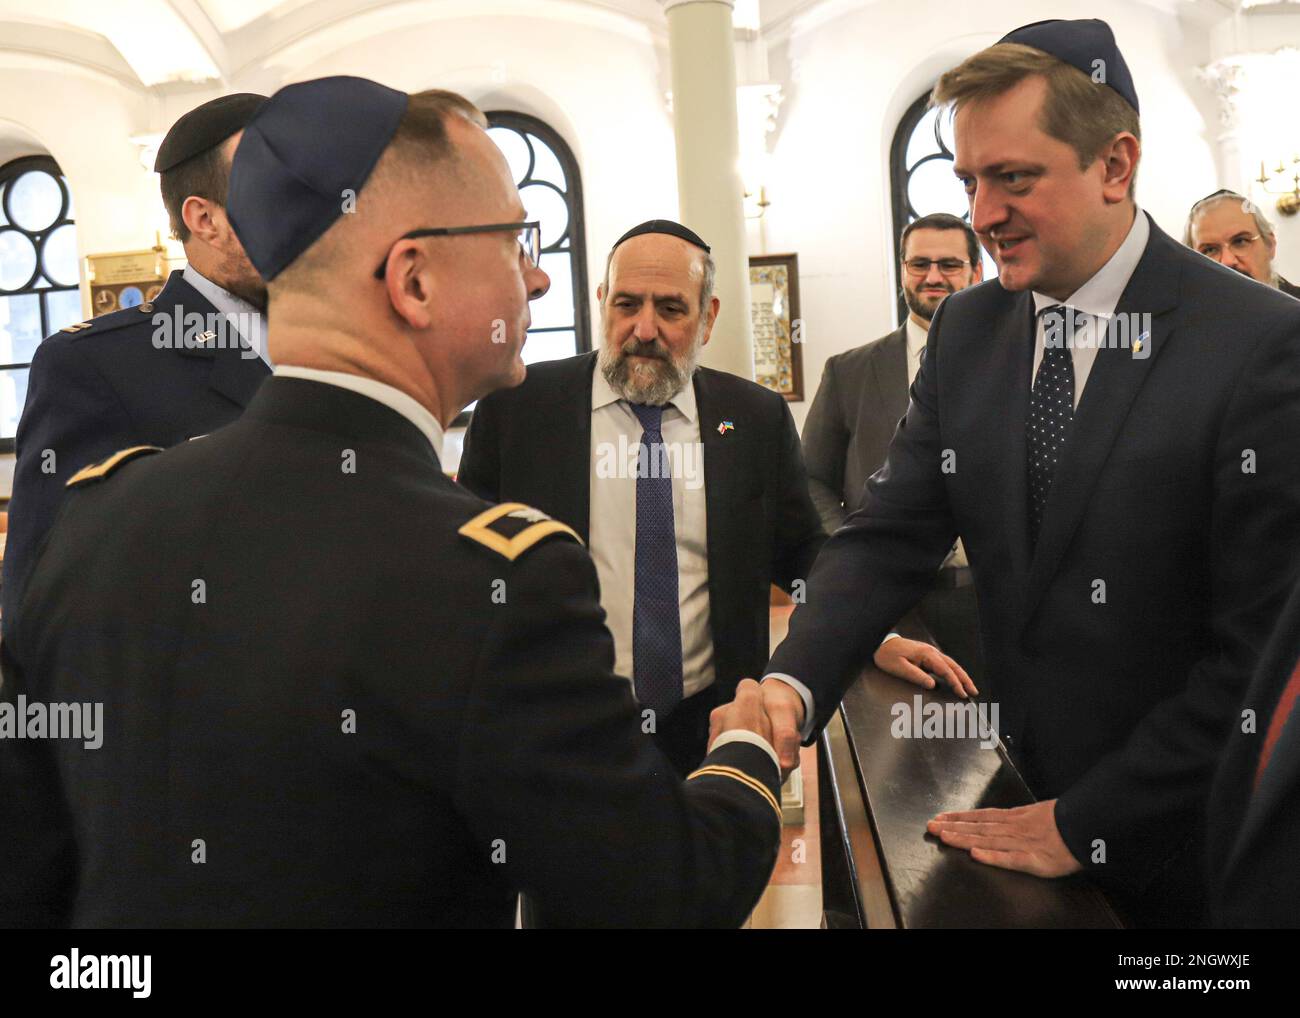 WARSAW, Poland - U.S. Army V Corps Chaplain Col. Benjamin Sprouse, left, shakes the hand of Vasyl Zwarycz, Ambassador of Ukraine to Poland, before the dedication of a Torah Scroll to the Ukrainian Army commences, Nov. 29, 2022, Warsaw, Poland. Jewish Chaplains alongside distinguished guests, refugees from Ukraine, and U.S. ally partner nations attended the event to support the Ukrainian Chaplaincy’s religious support efforts. Stock Photo